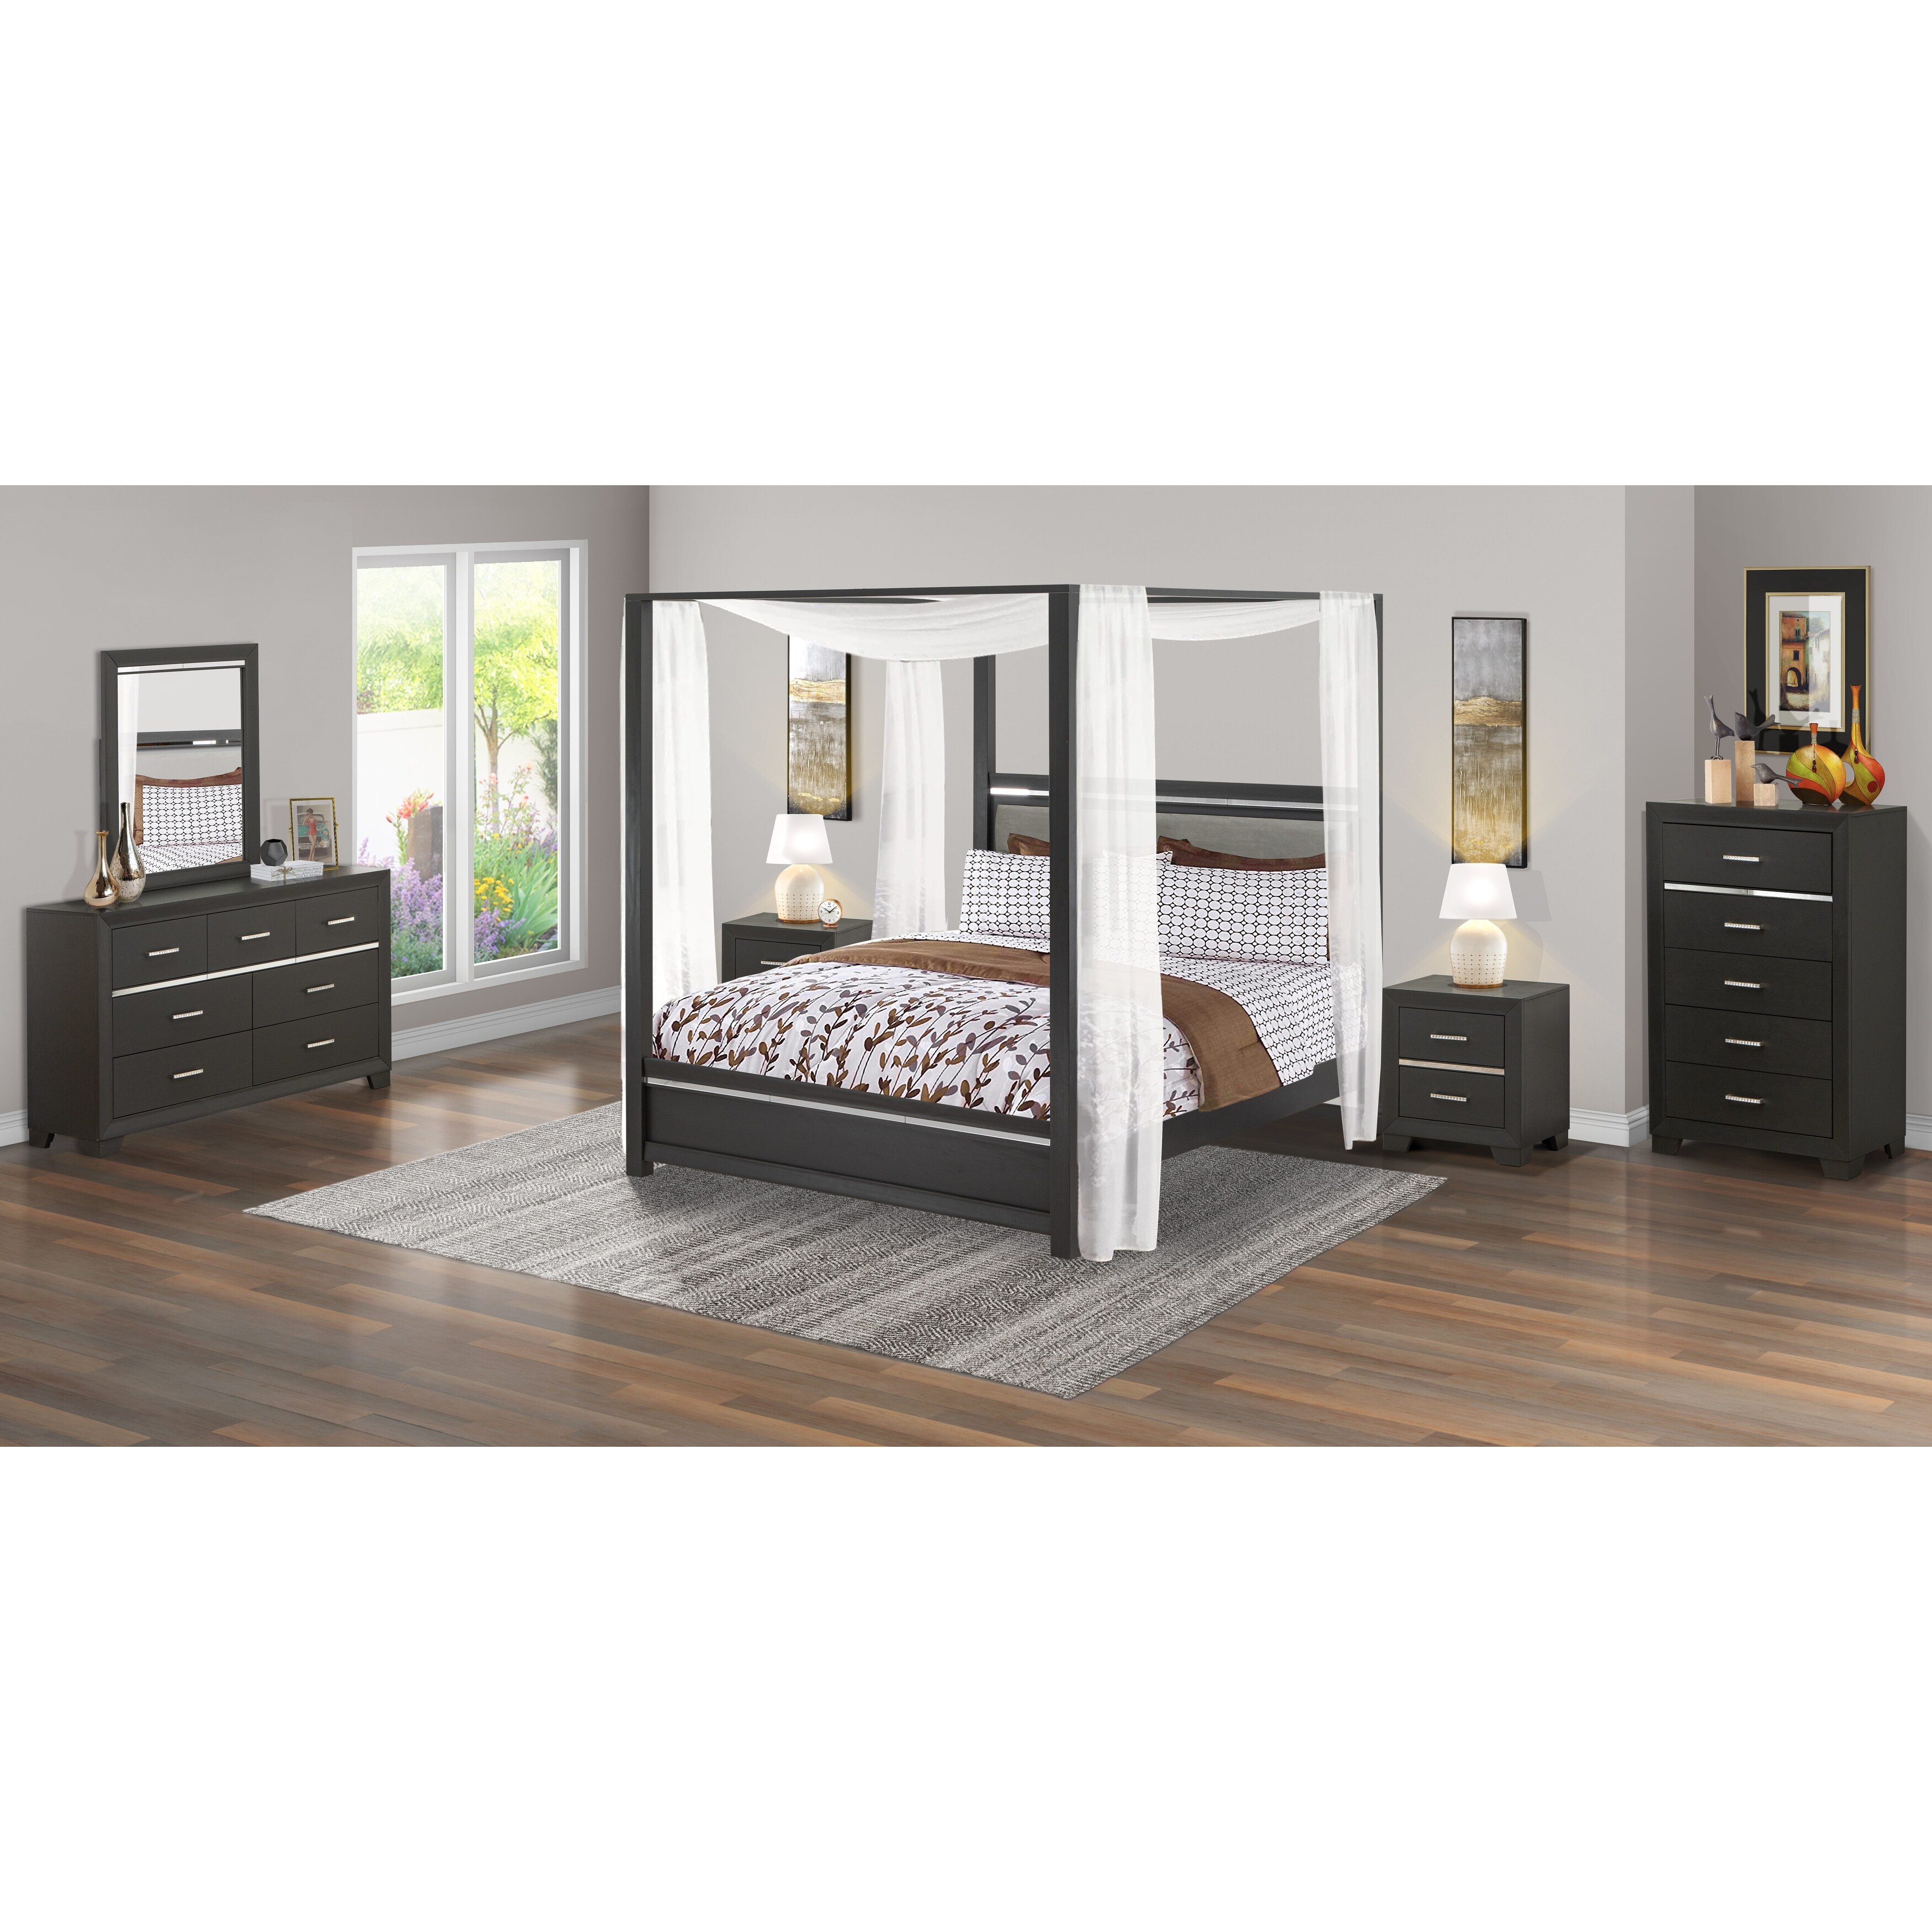 Queen Size Canopy Bed Bedroom Sets - Bed Bath & Beyond